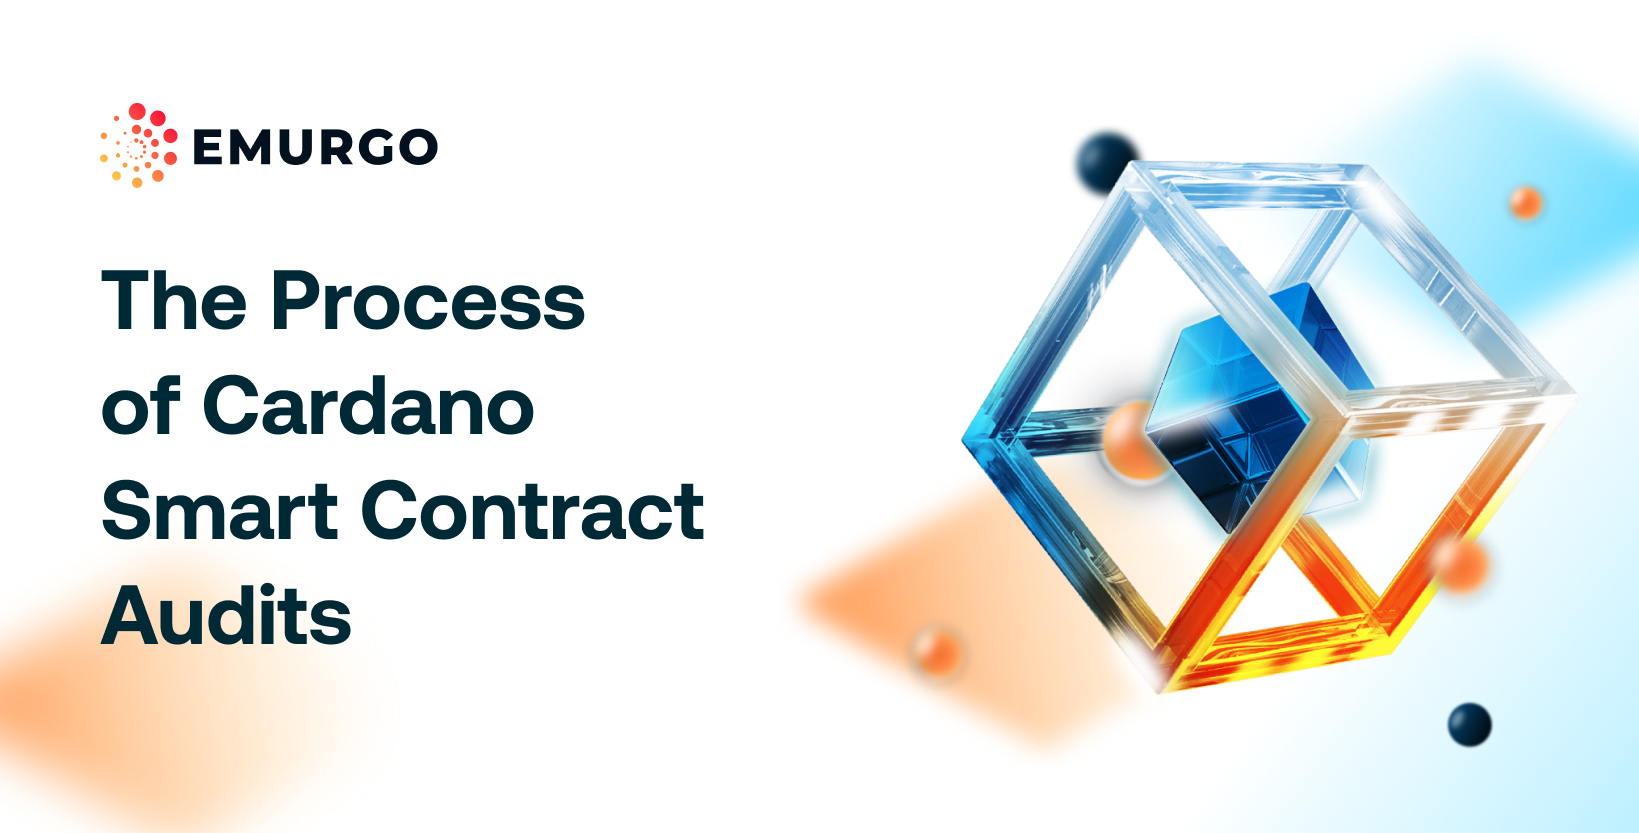 The Process of Cardano Smart Contract Audits